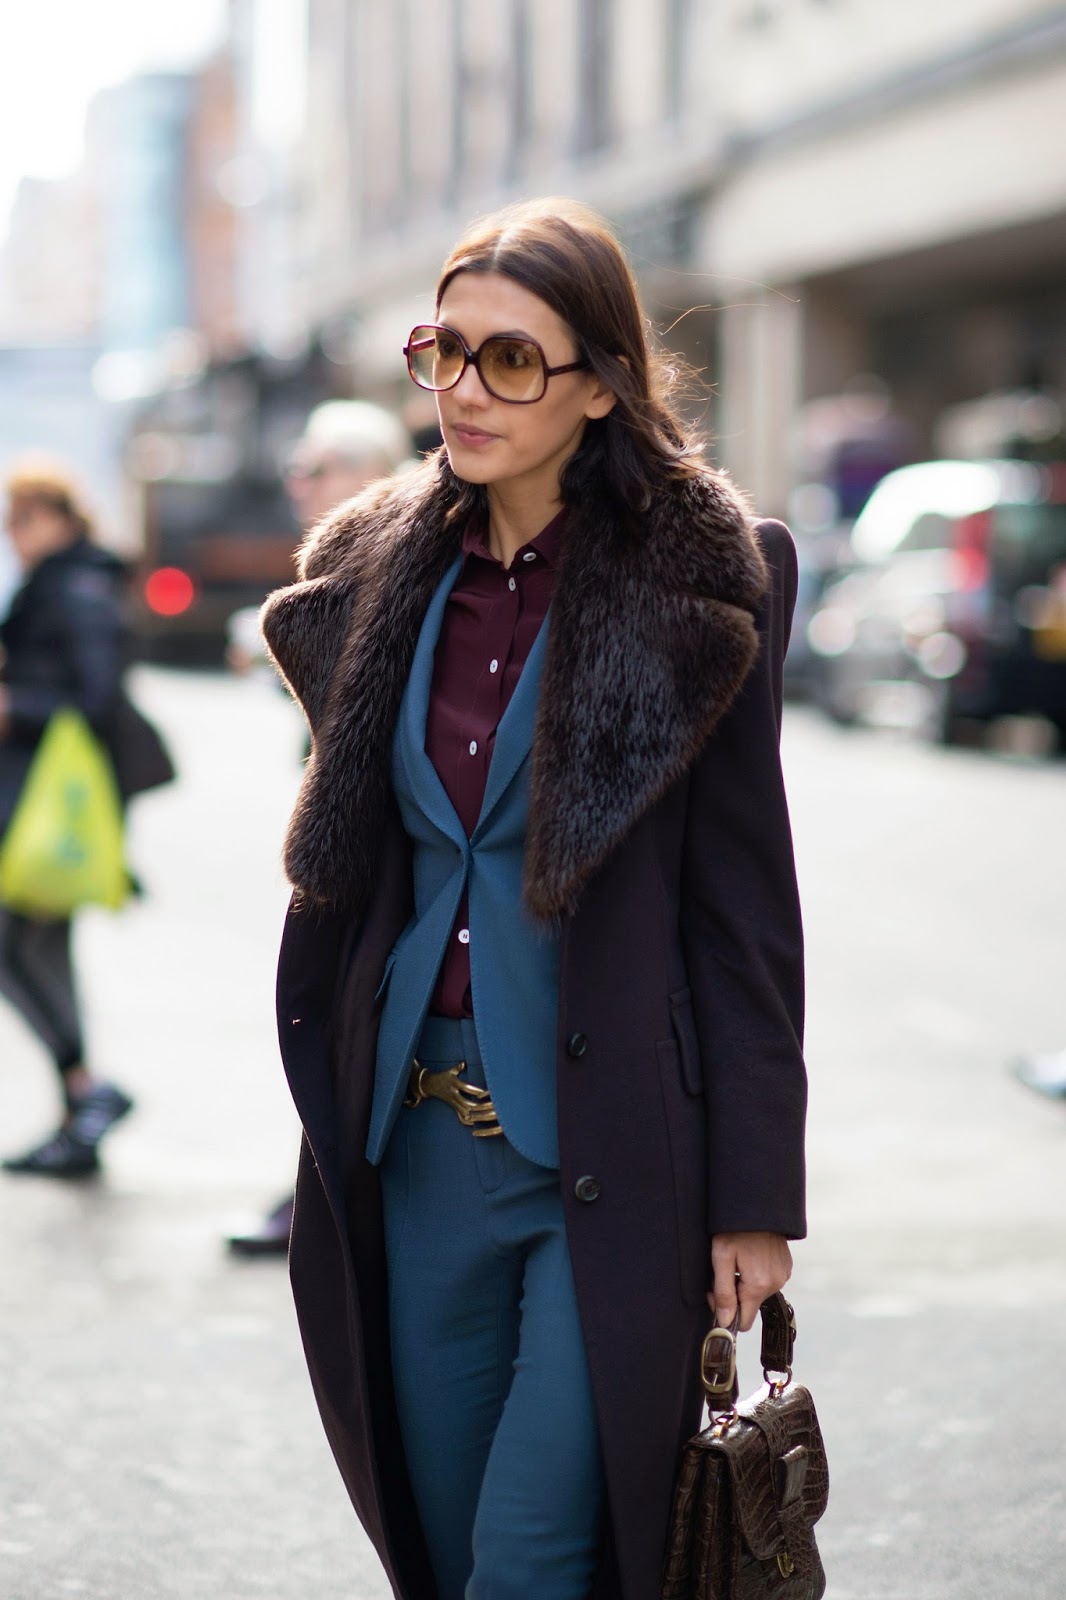 The BestDressed People From LFW 2015. STREET STYLE Cool Chic Style